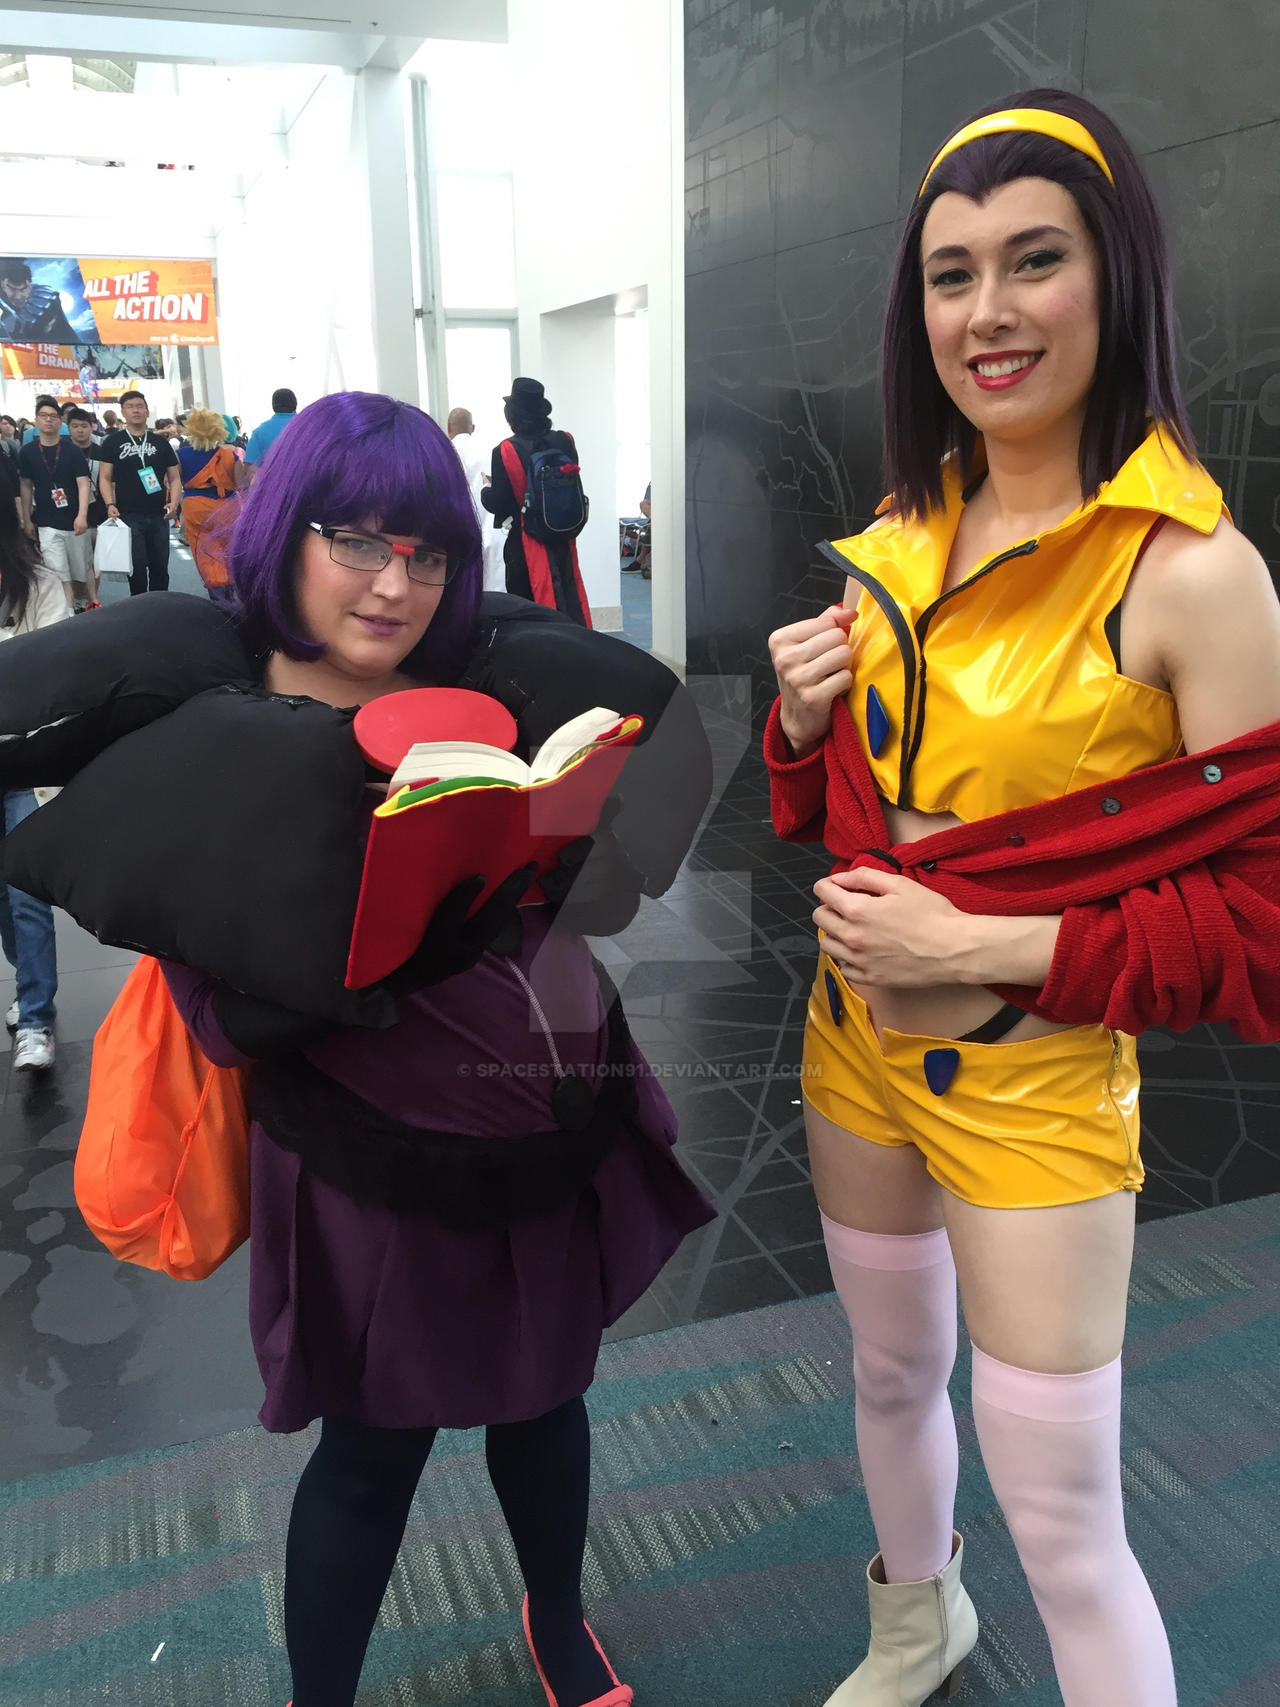 AX 2016 - Shauntal and Faye Valentine Cosplay by SpaceStation91 on ...